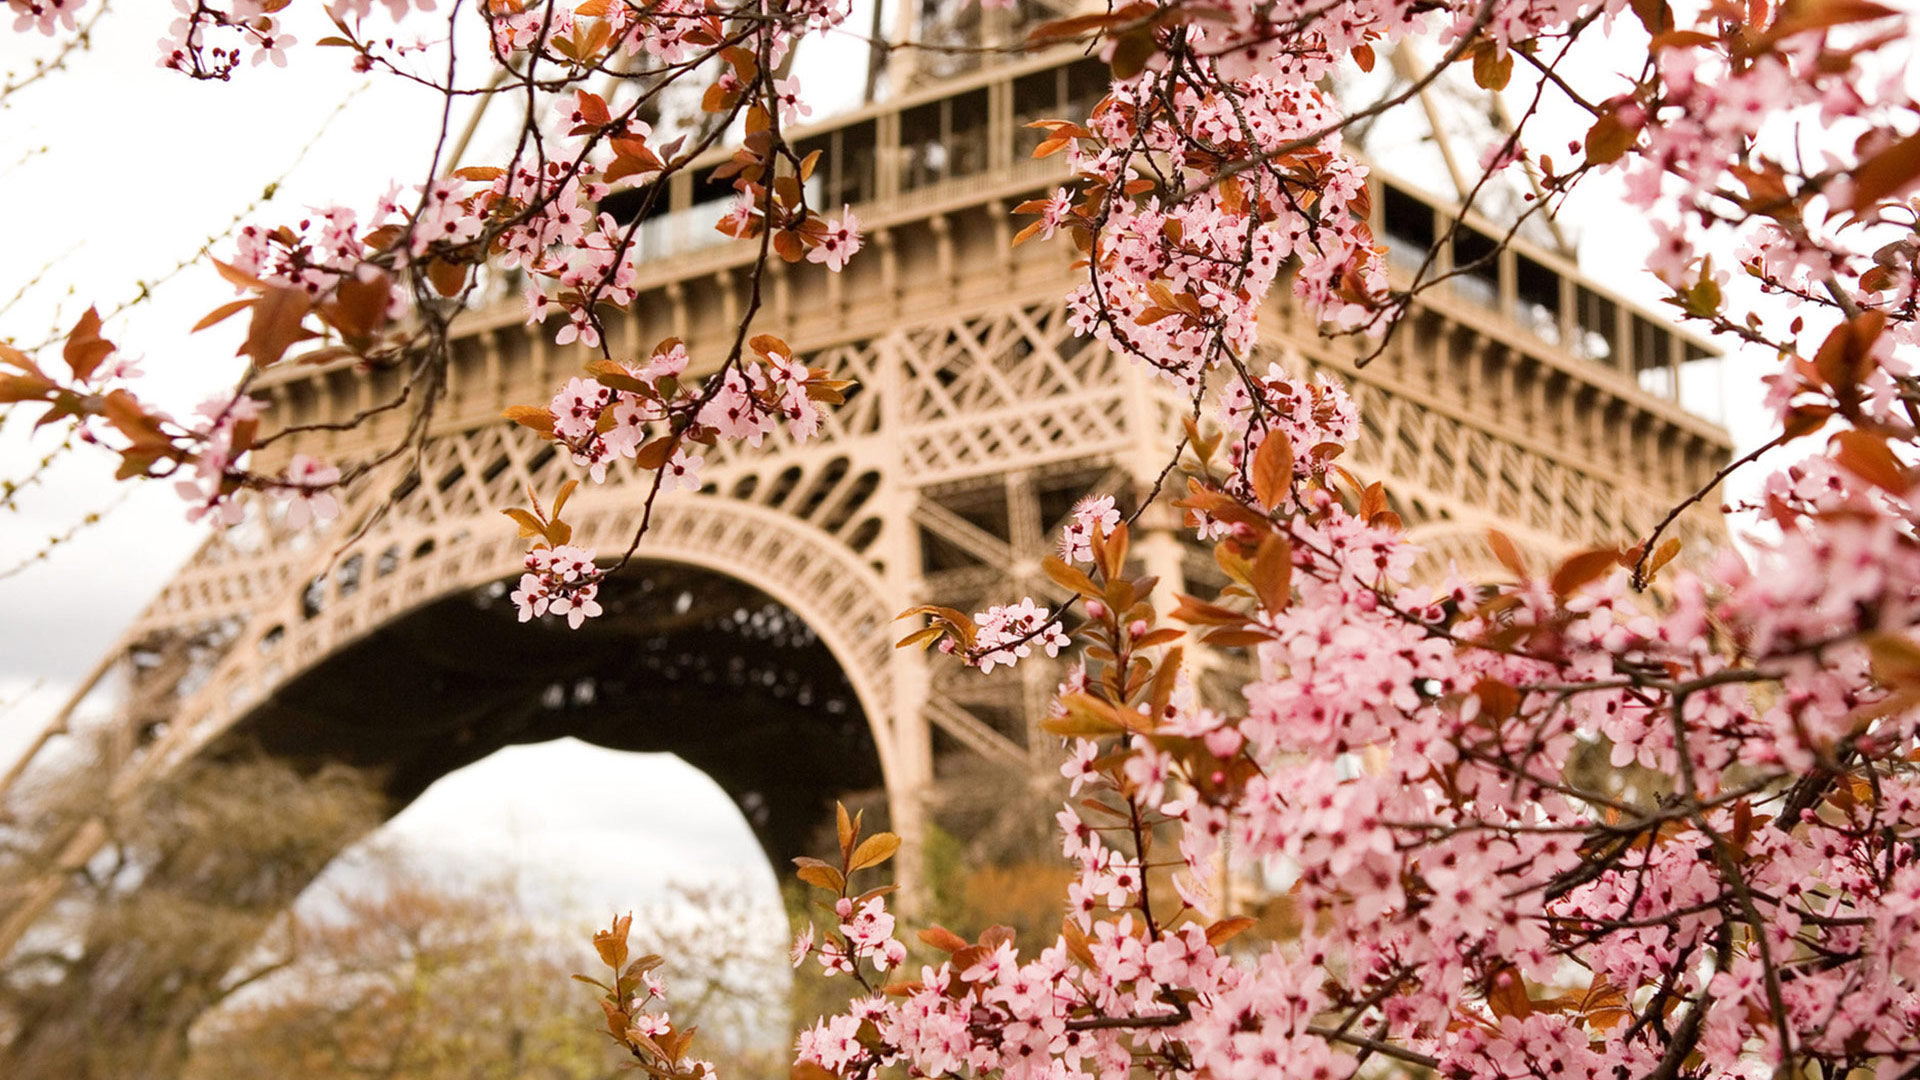 Book Direct Sale: Get a Free Night this April in Paris!